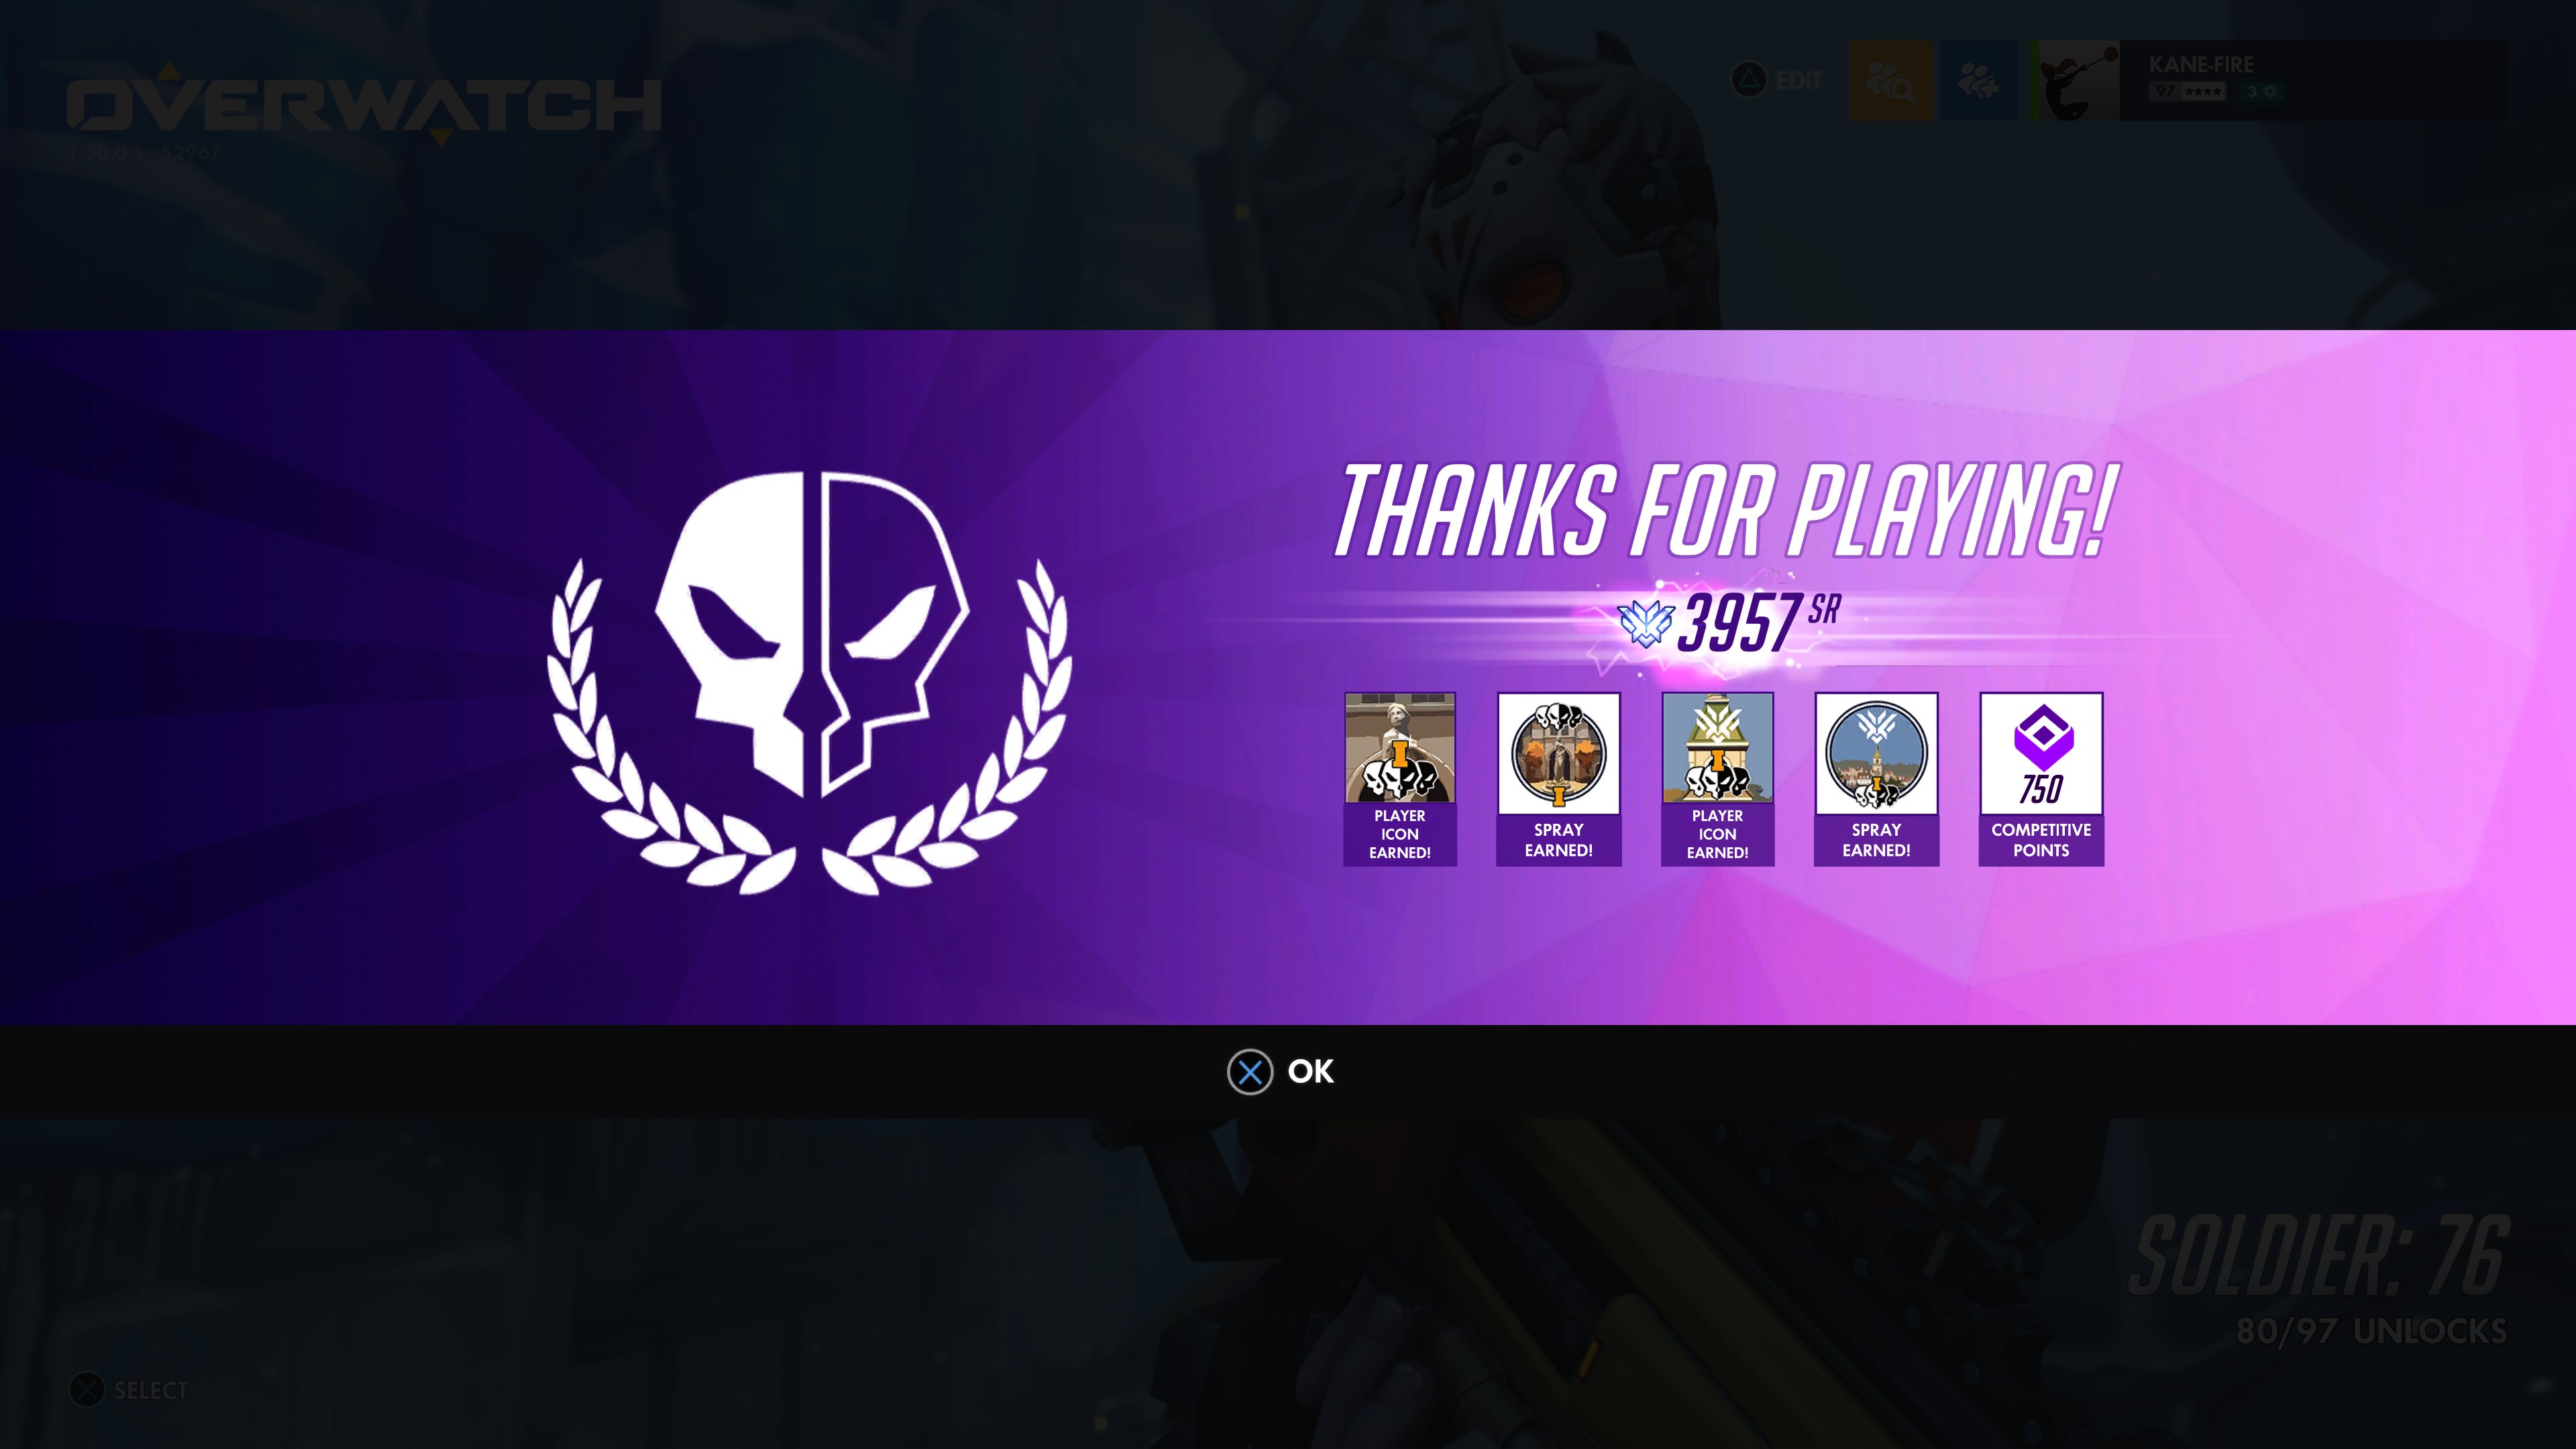 barrikade kabel Transformer Renka on Twitter: "Another Top 500 icon added to my collection #Overwatch  https://t.co/0ZXDmGdTNj" / Twitter